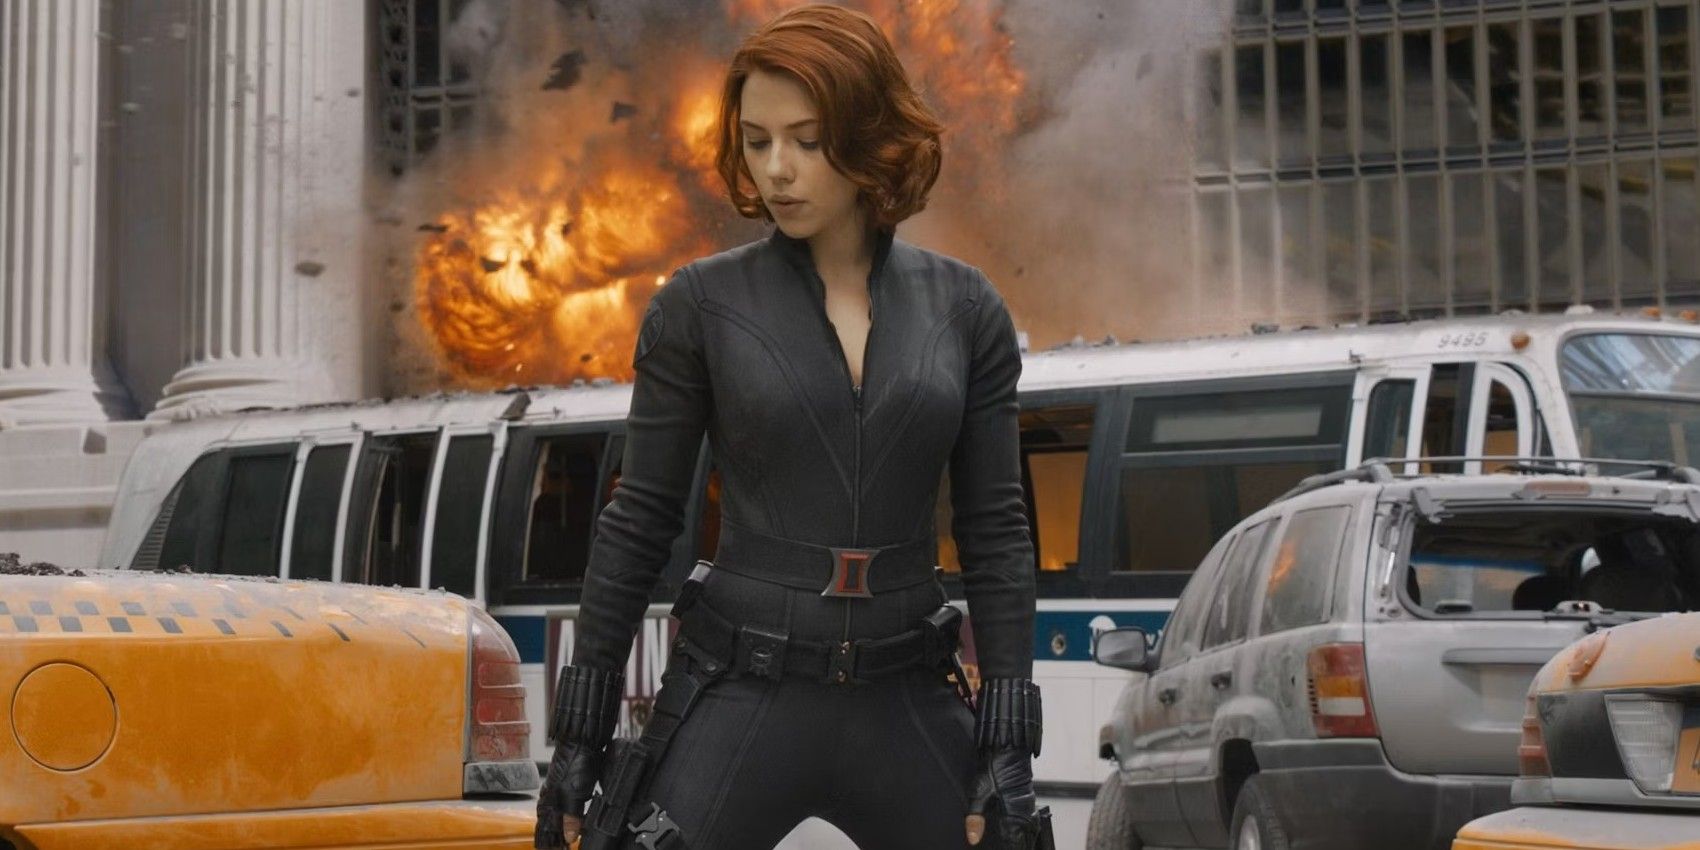 Black Widow in The Avengers as an explosion goes off behind her.